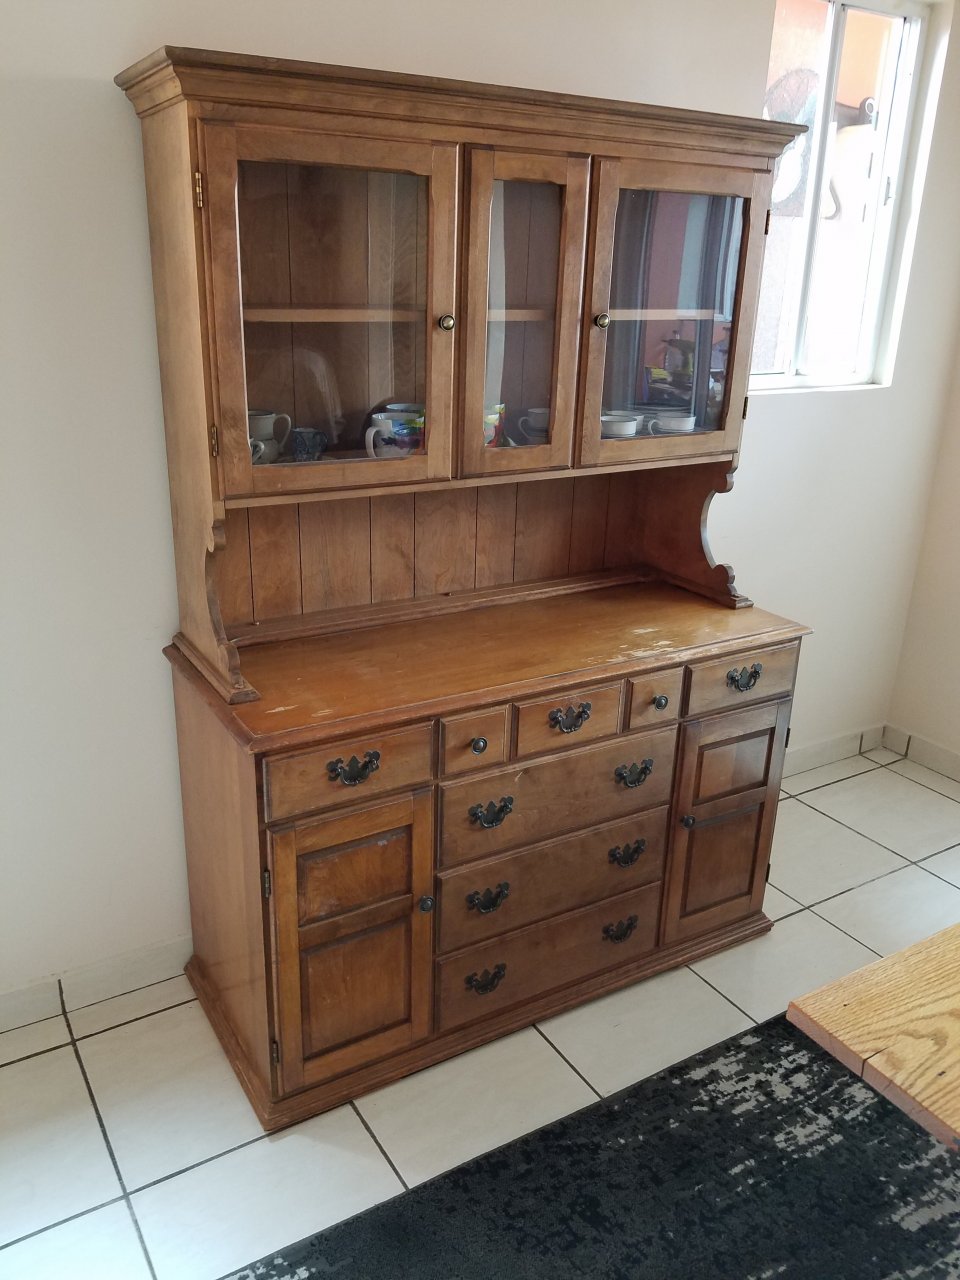 Colonial Craft Hutch My Antique Furniture Collection